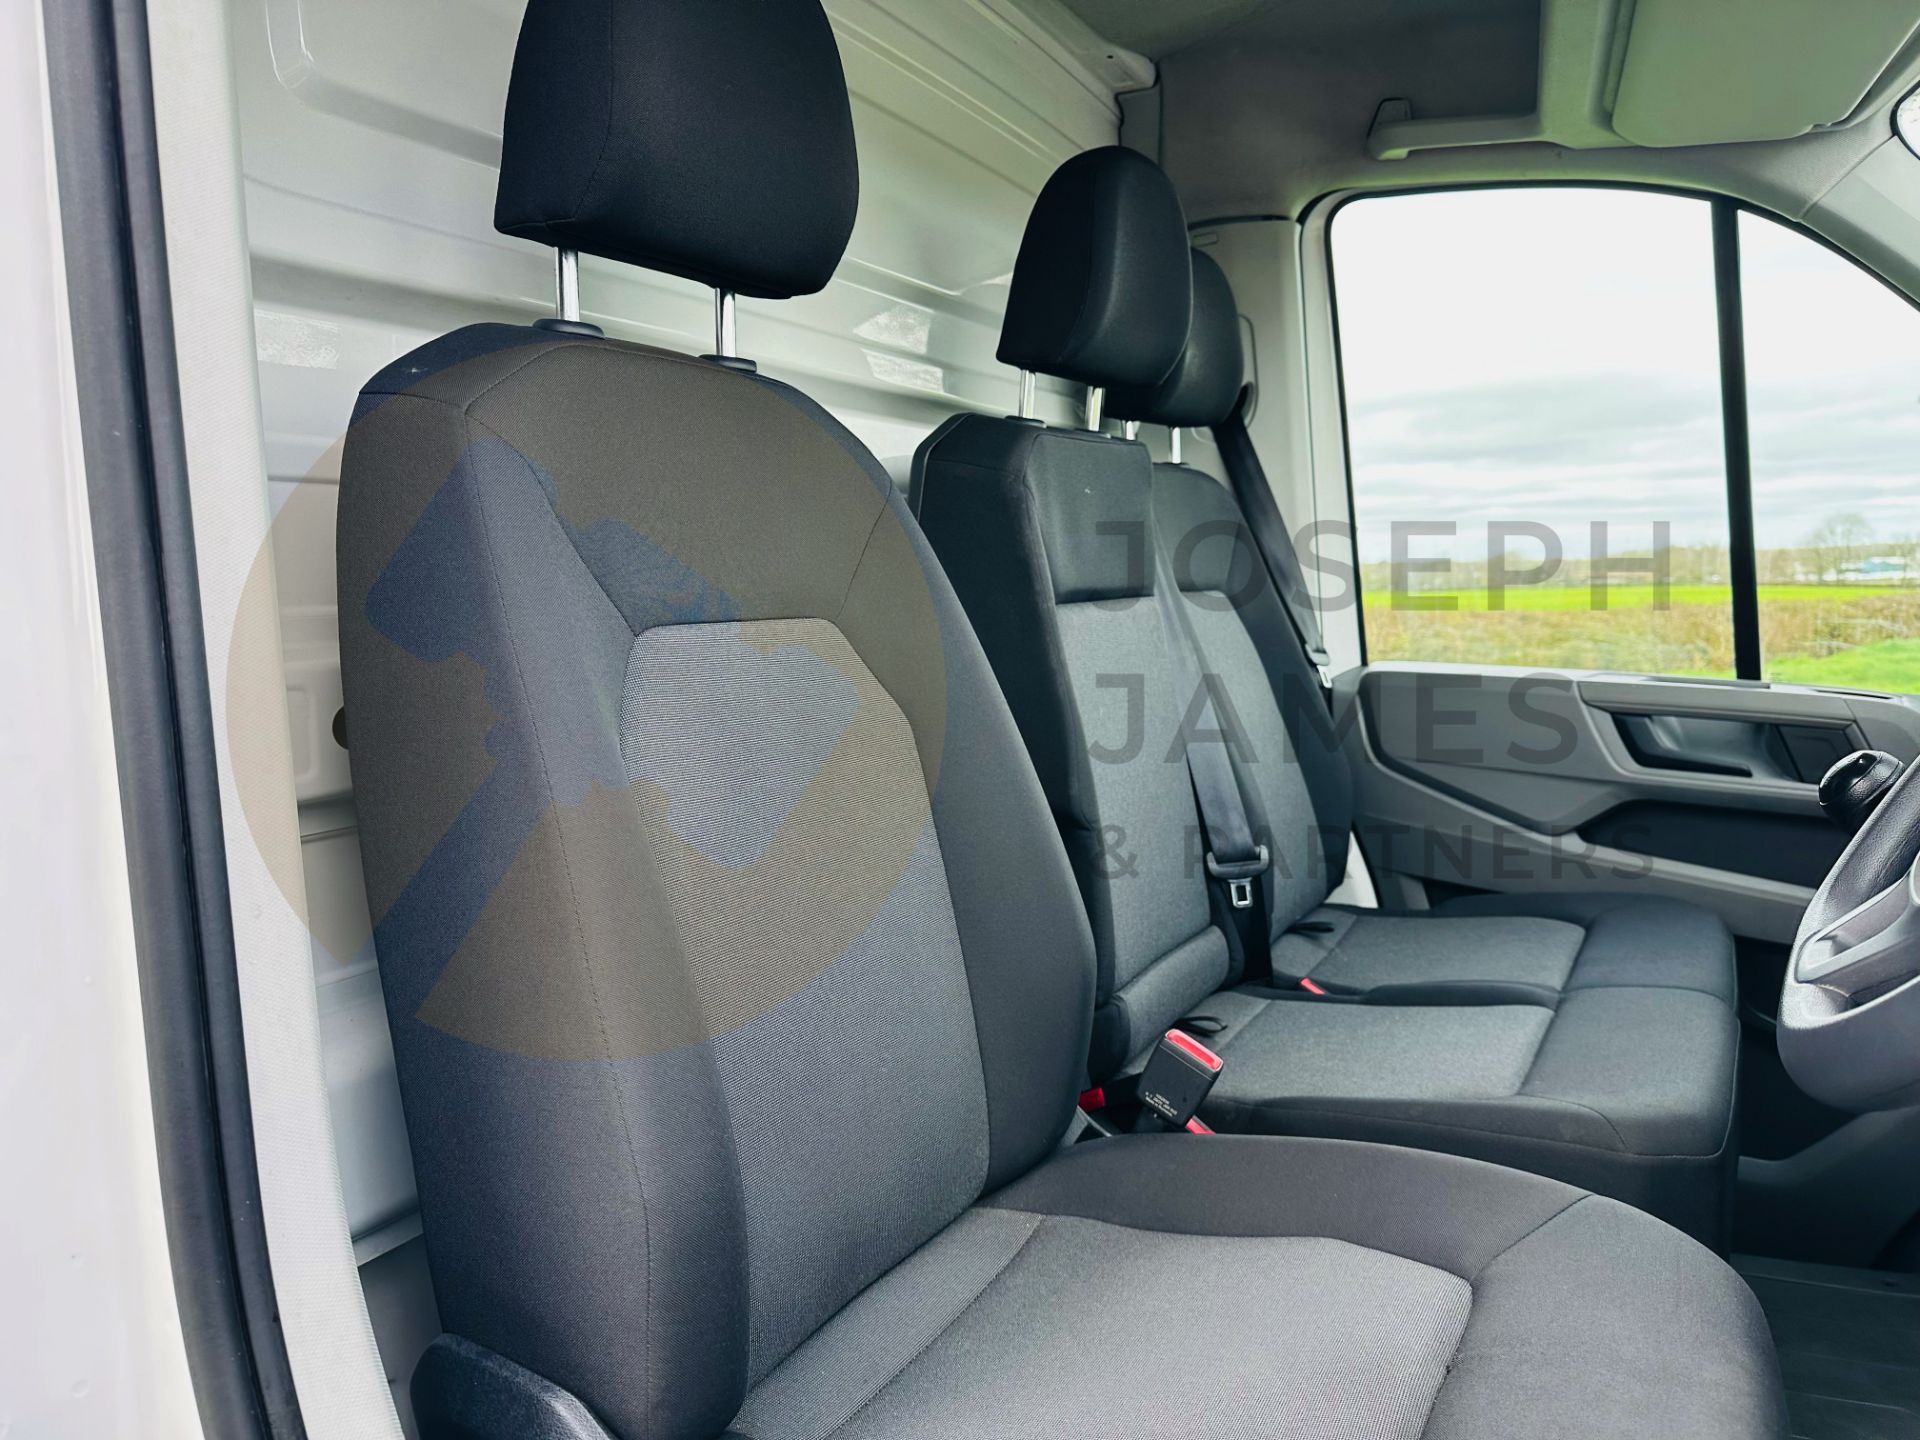 VOLKSWAGEN CRAFTER 2.0 TDI (140) LWB LUTON WITH TAIL LIFT (2021 MODEL) 1 OWNER - LOW MILES - AIR CON - Image 19 of 26